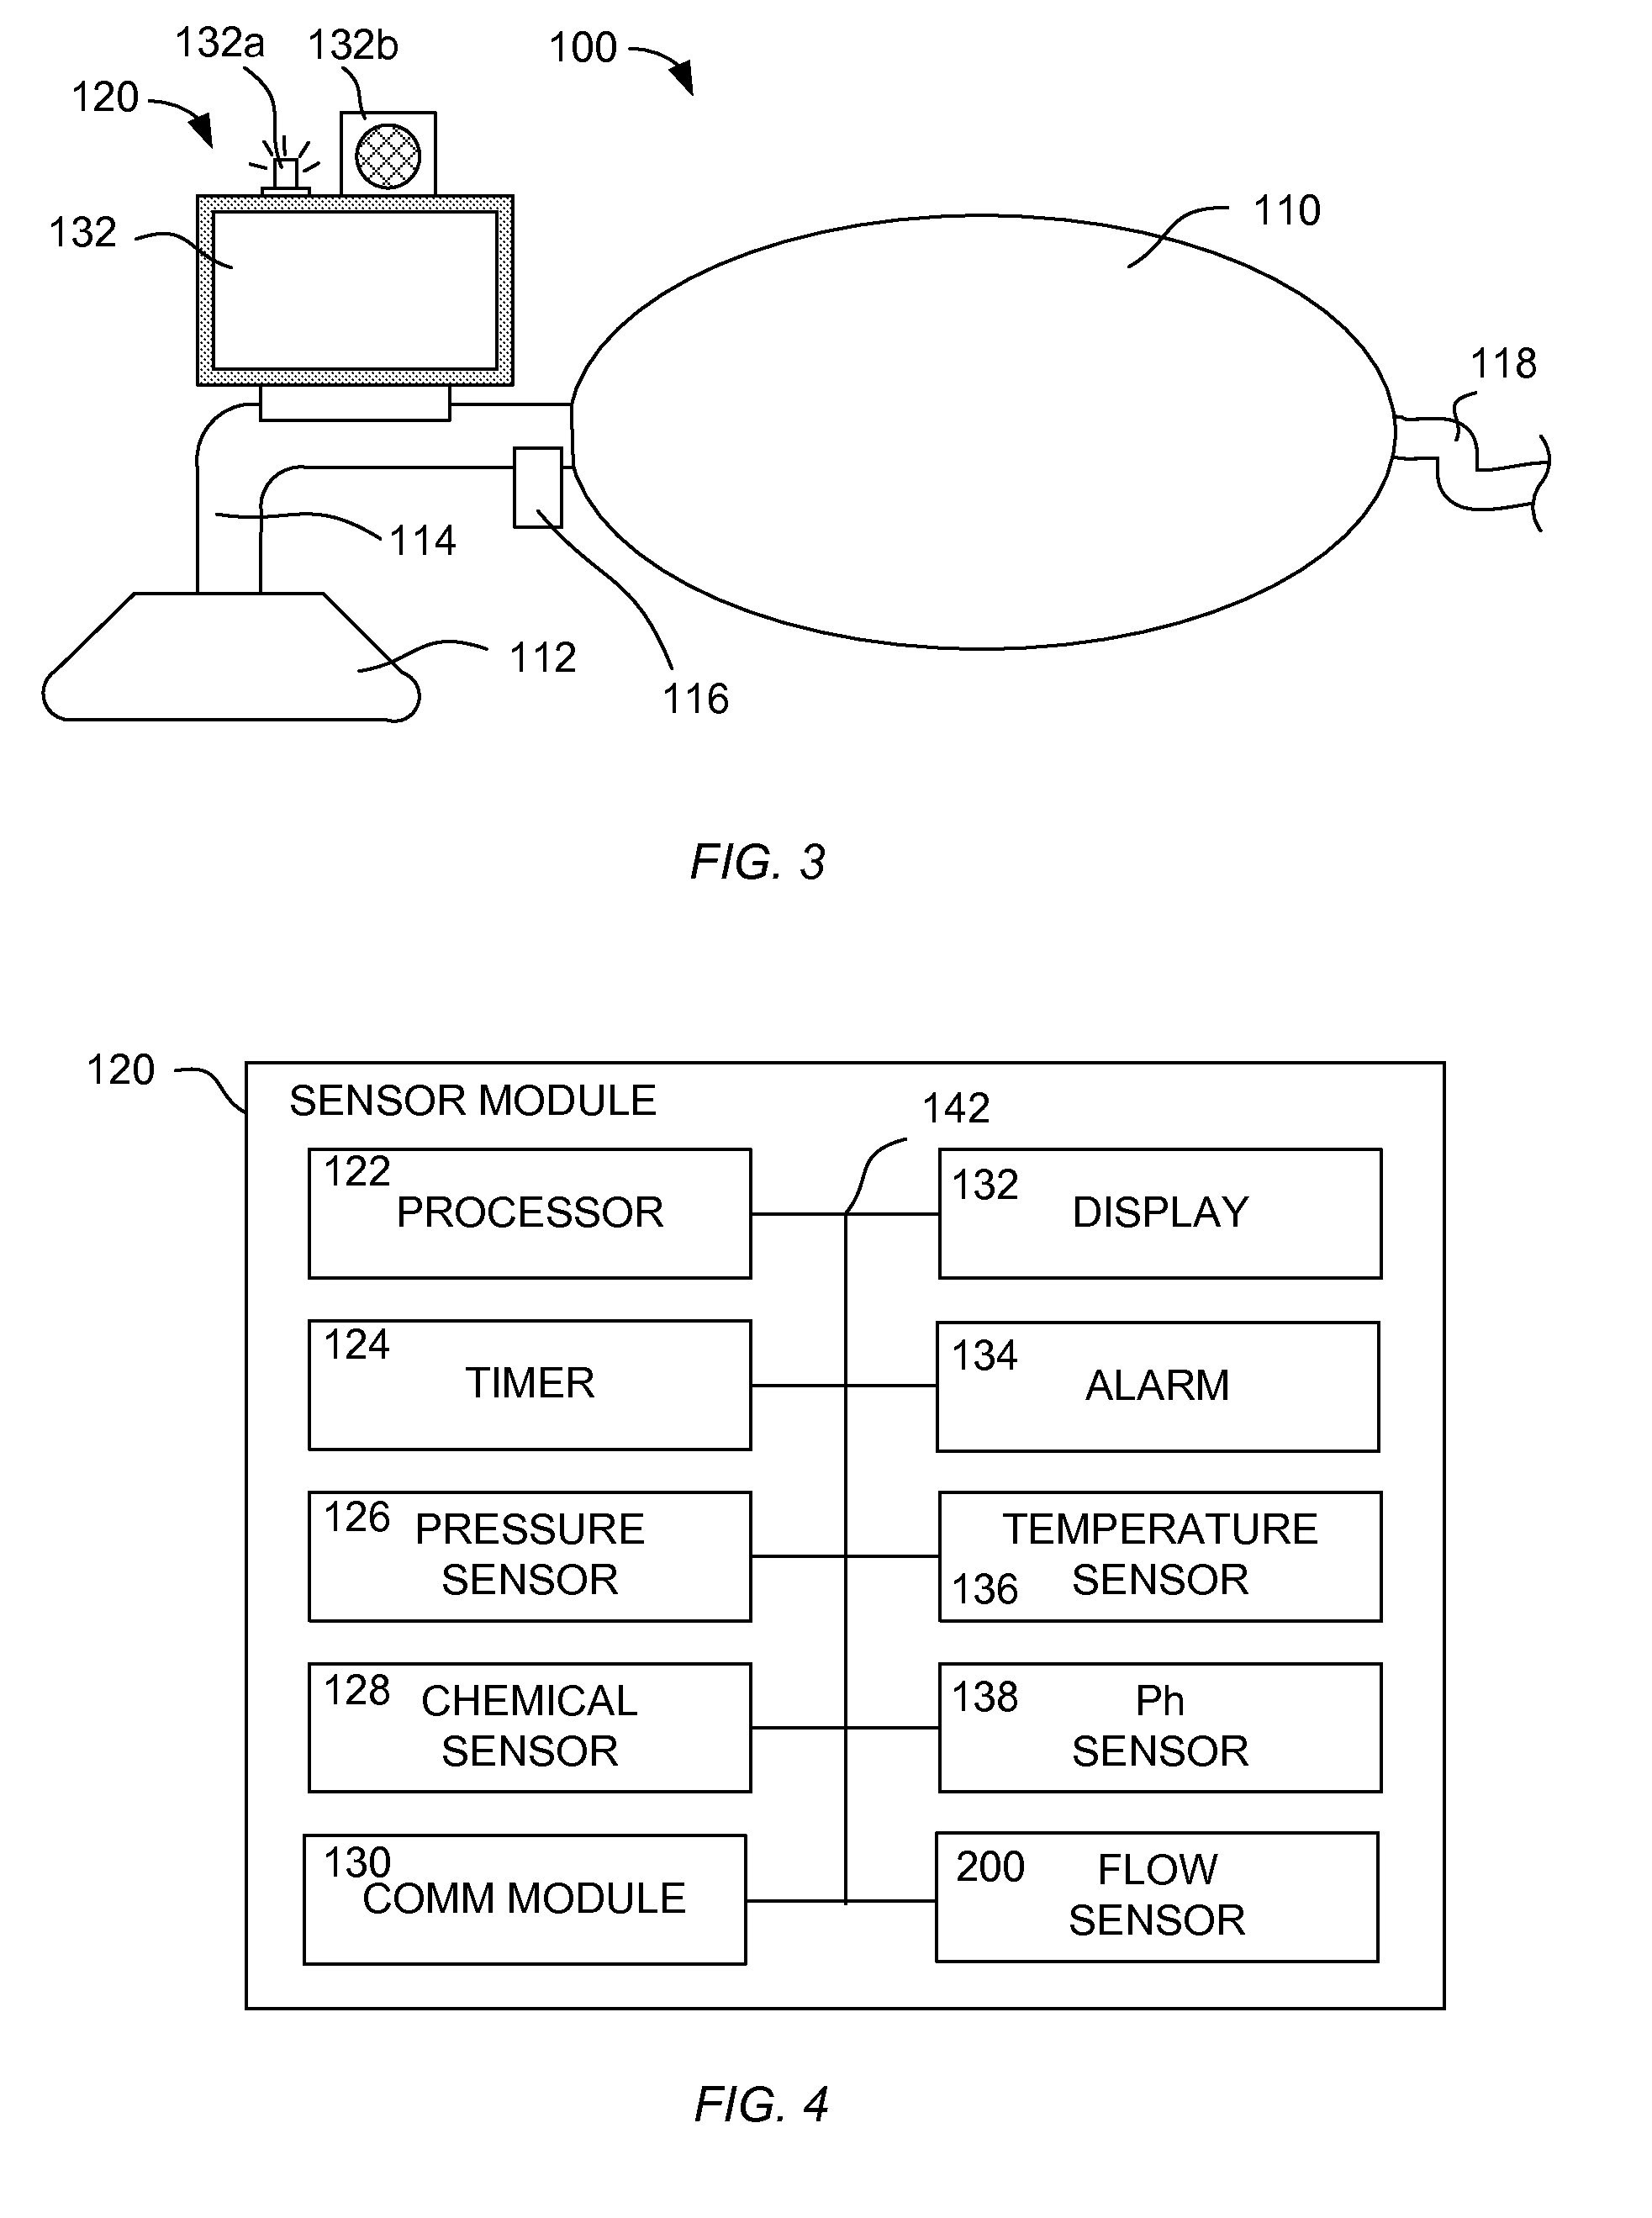 Resuscitation device with onboard processor